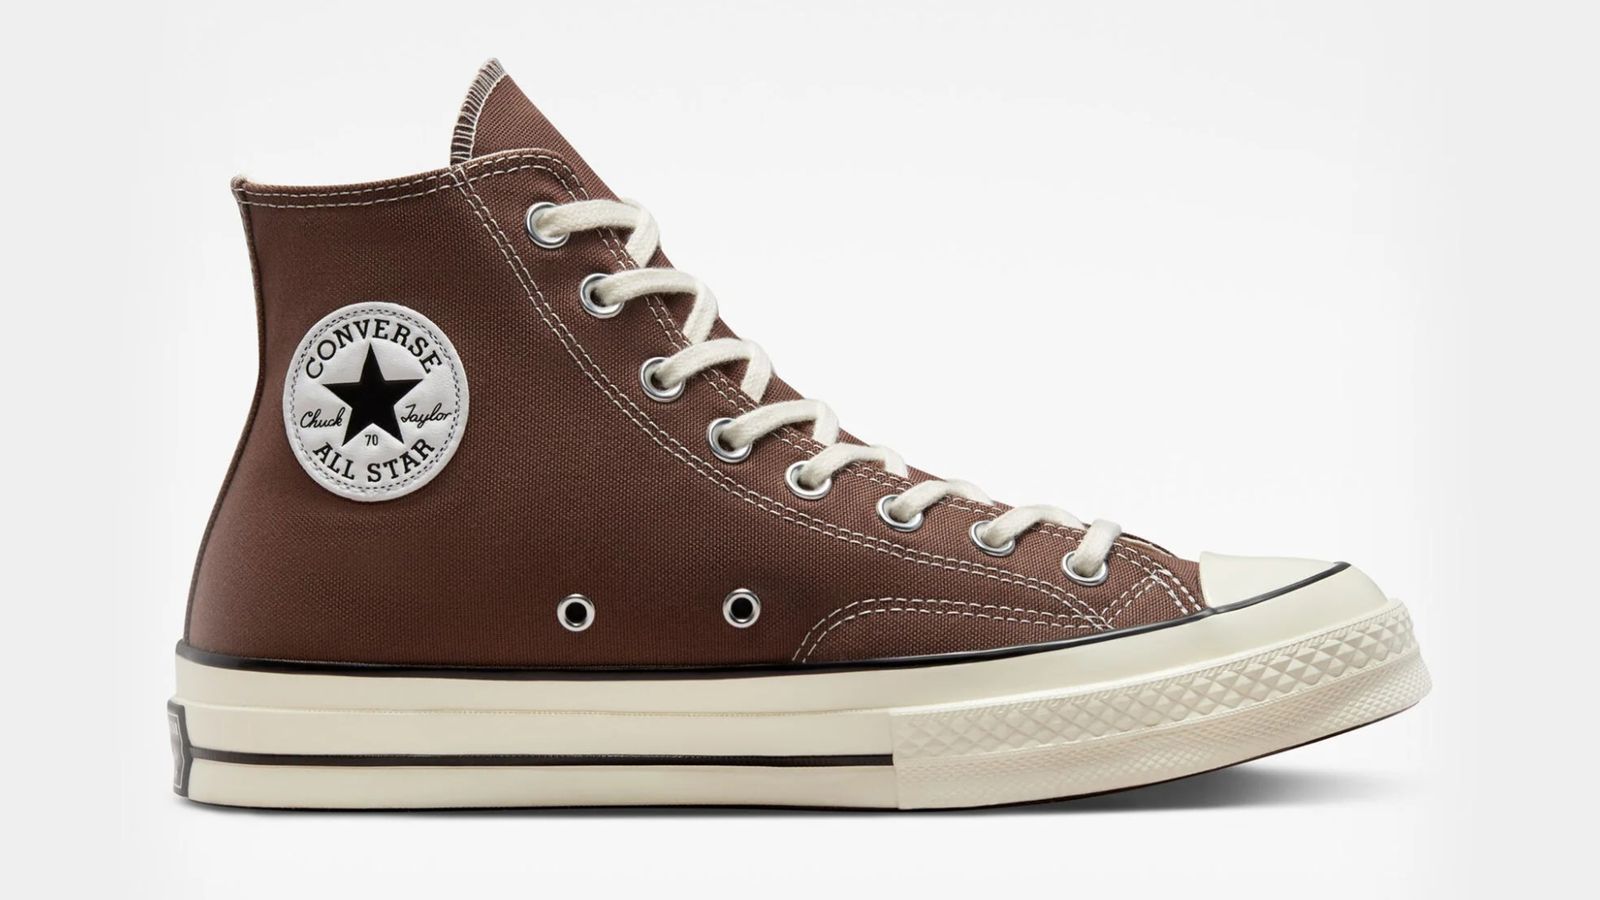 Converse Chuck Taylor All Star 70 "Squirrel Friend" product image of a brown high-top featuring the white Converse All Star patch and light cream sole.